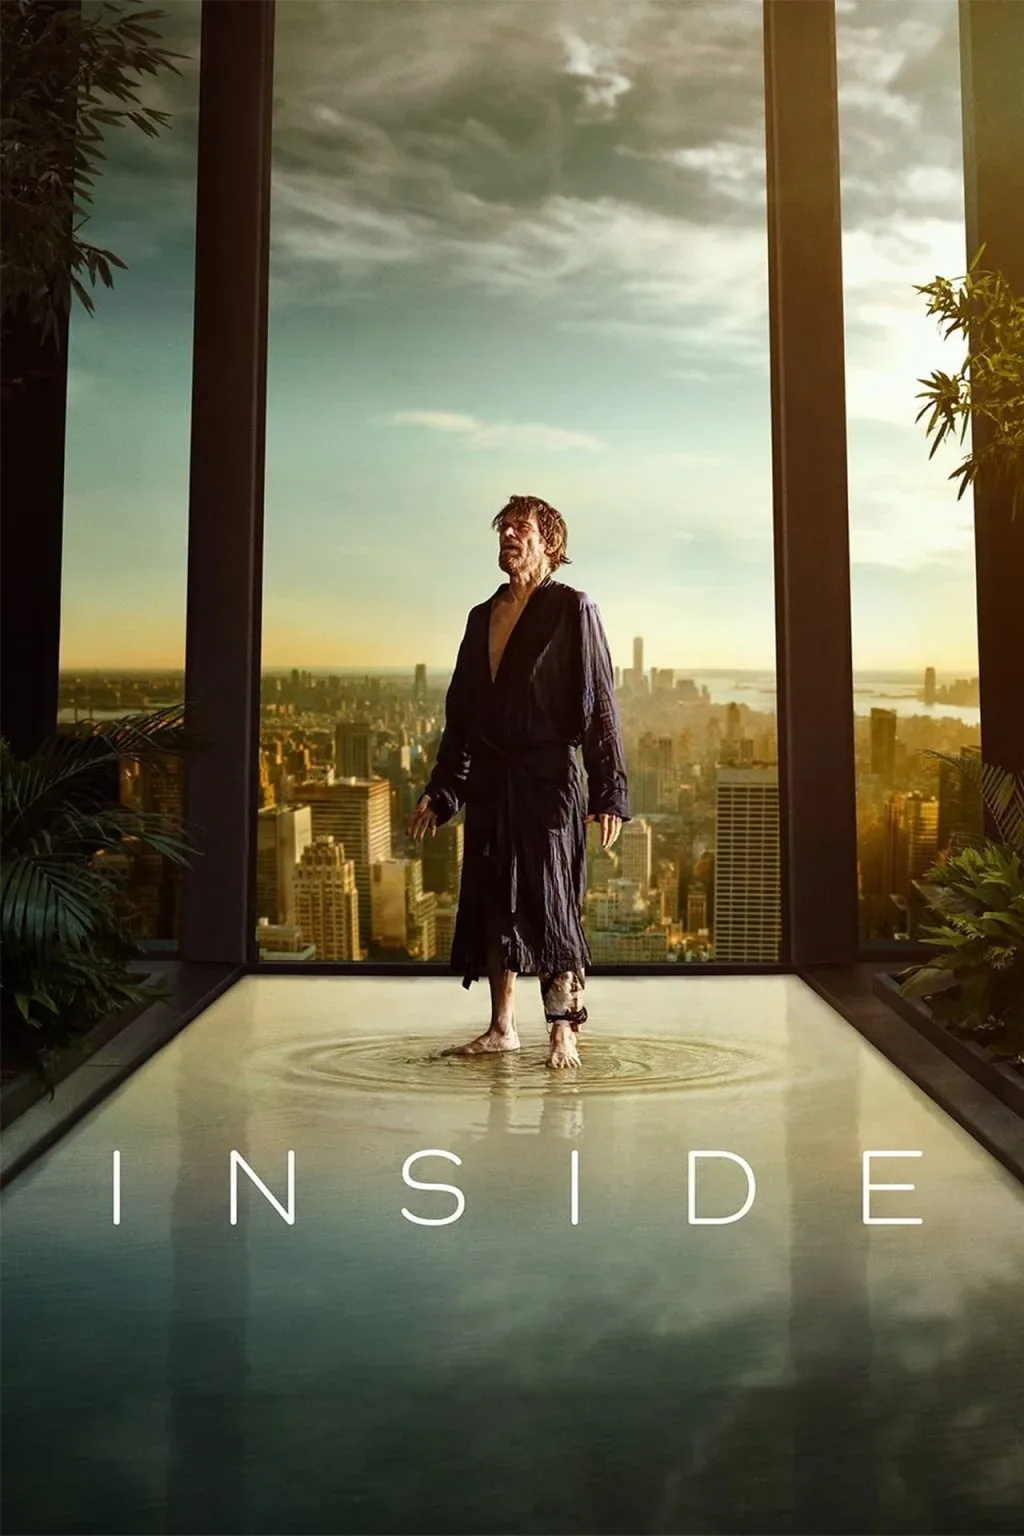 In The Movie, Inside, A high-end art thief becomes trapped inside a luxury, high-tech penthouse in New York's Times Square after his heist doesn't go as planned. Locked inside with nothing but priceless works of art, he must use all his cunning and invention to survive.